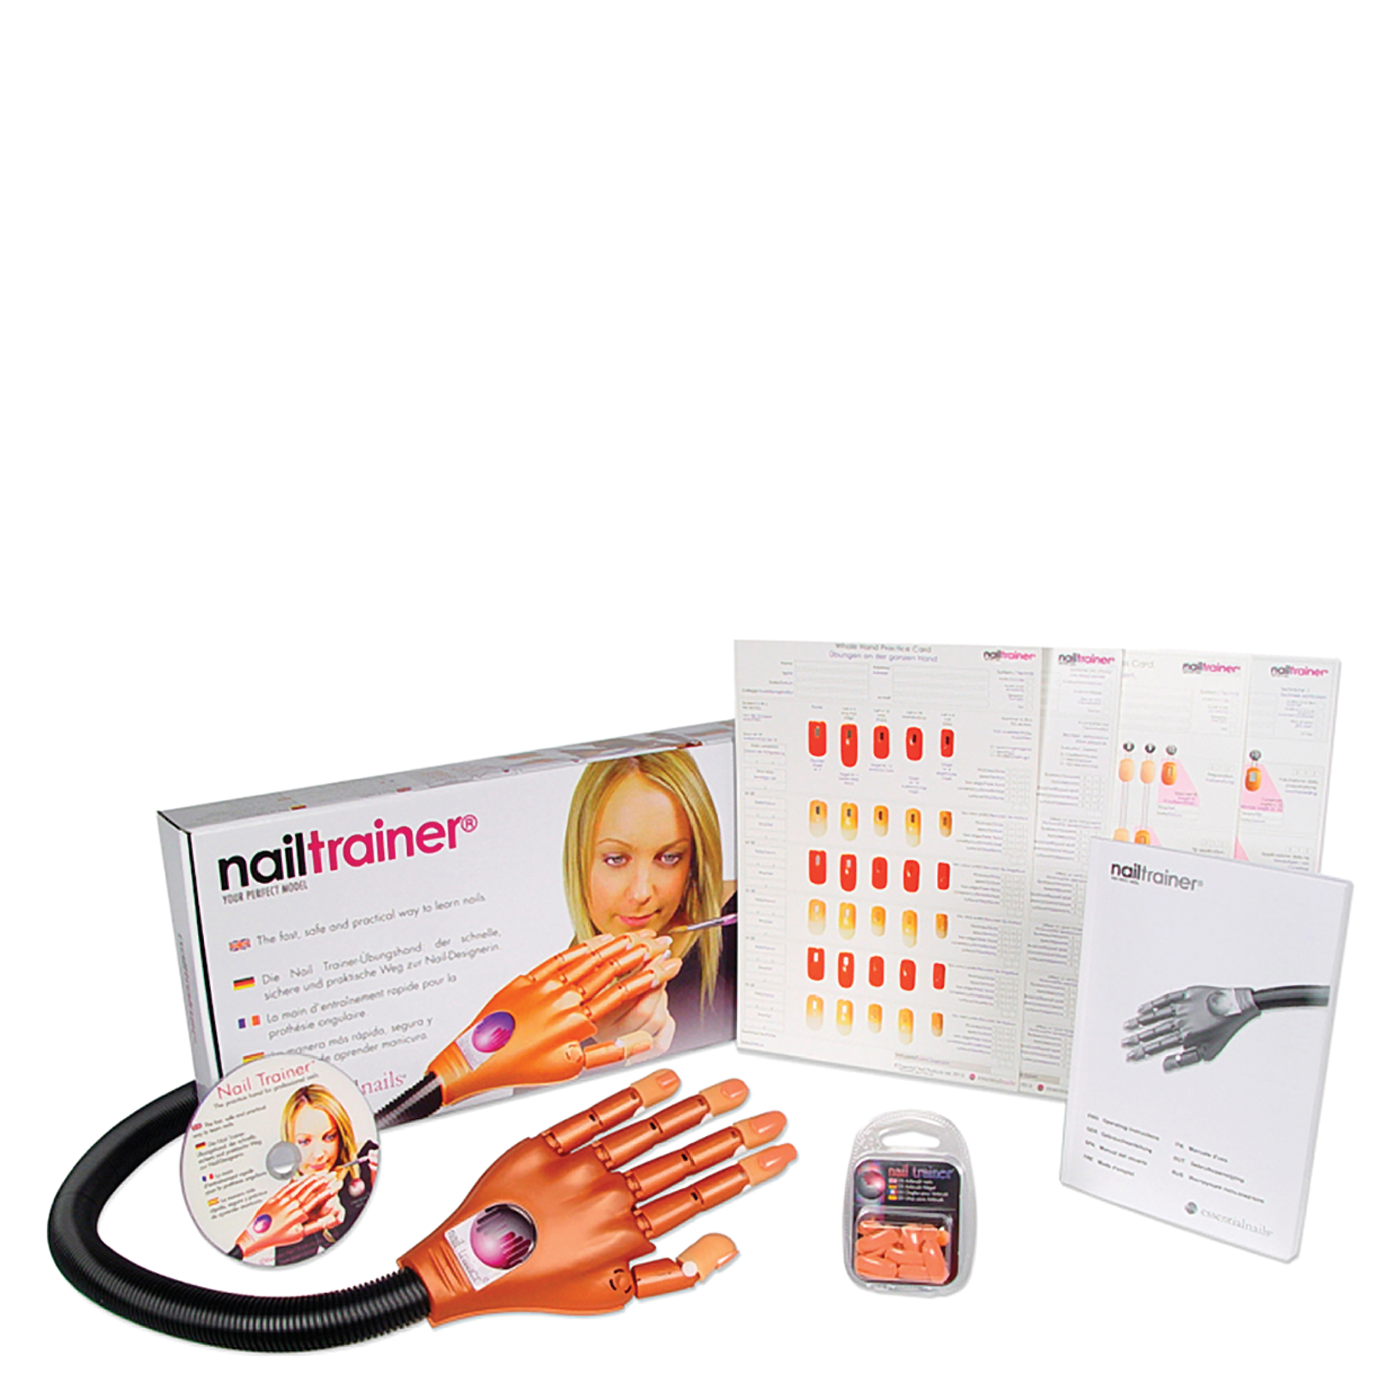 The Nail Trainer Kit